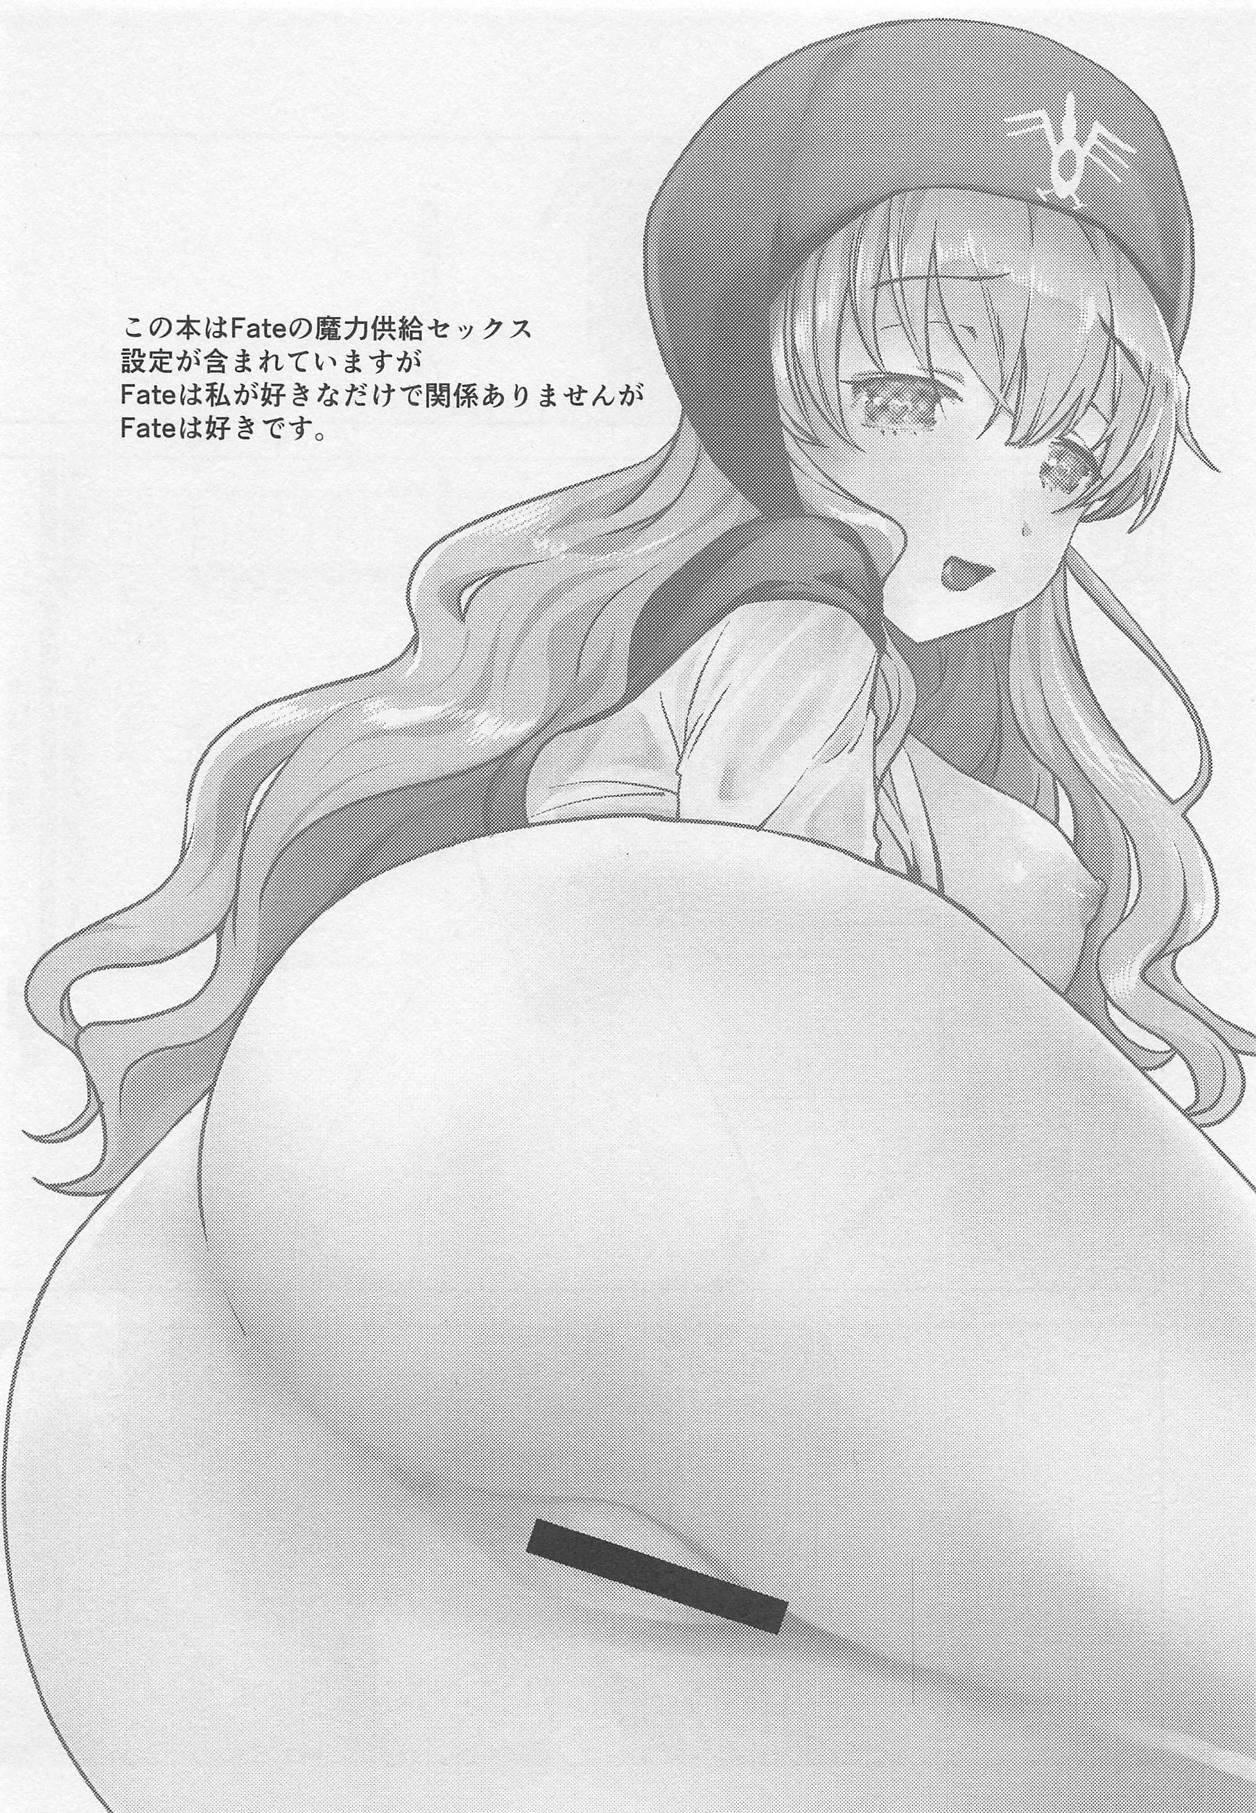 Best Blowjobs Ever Moonbrooke Oujo to Maryoku Kyoukyuu - Dragon quest ii Free Rough Porn - Page 2